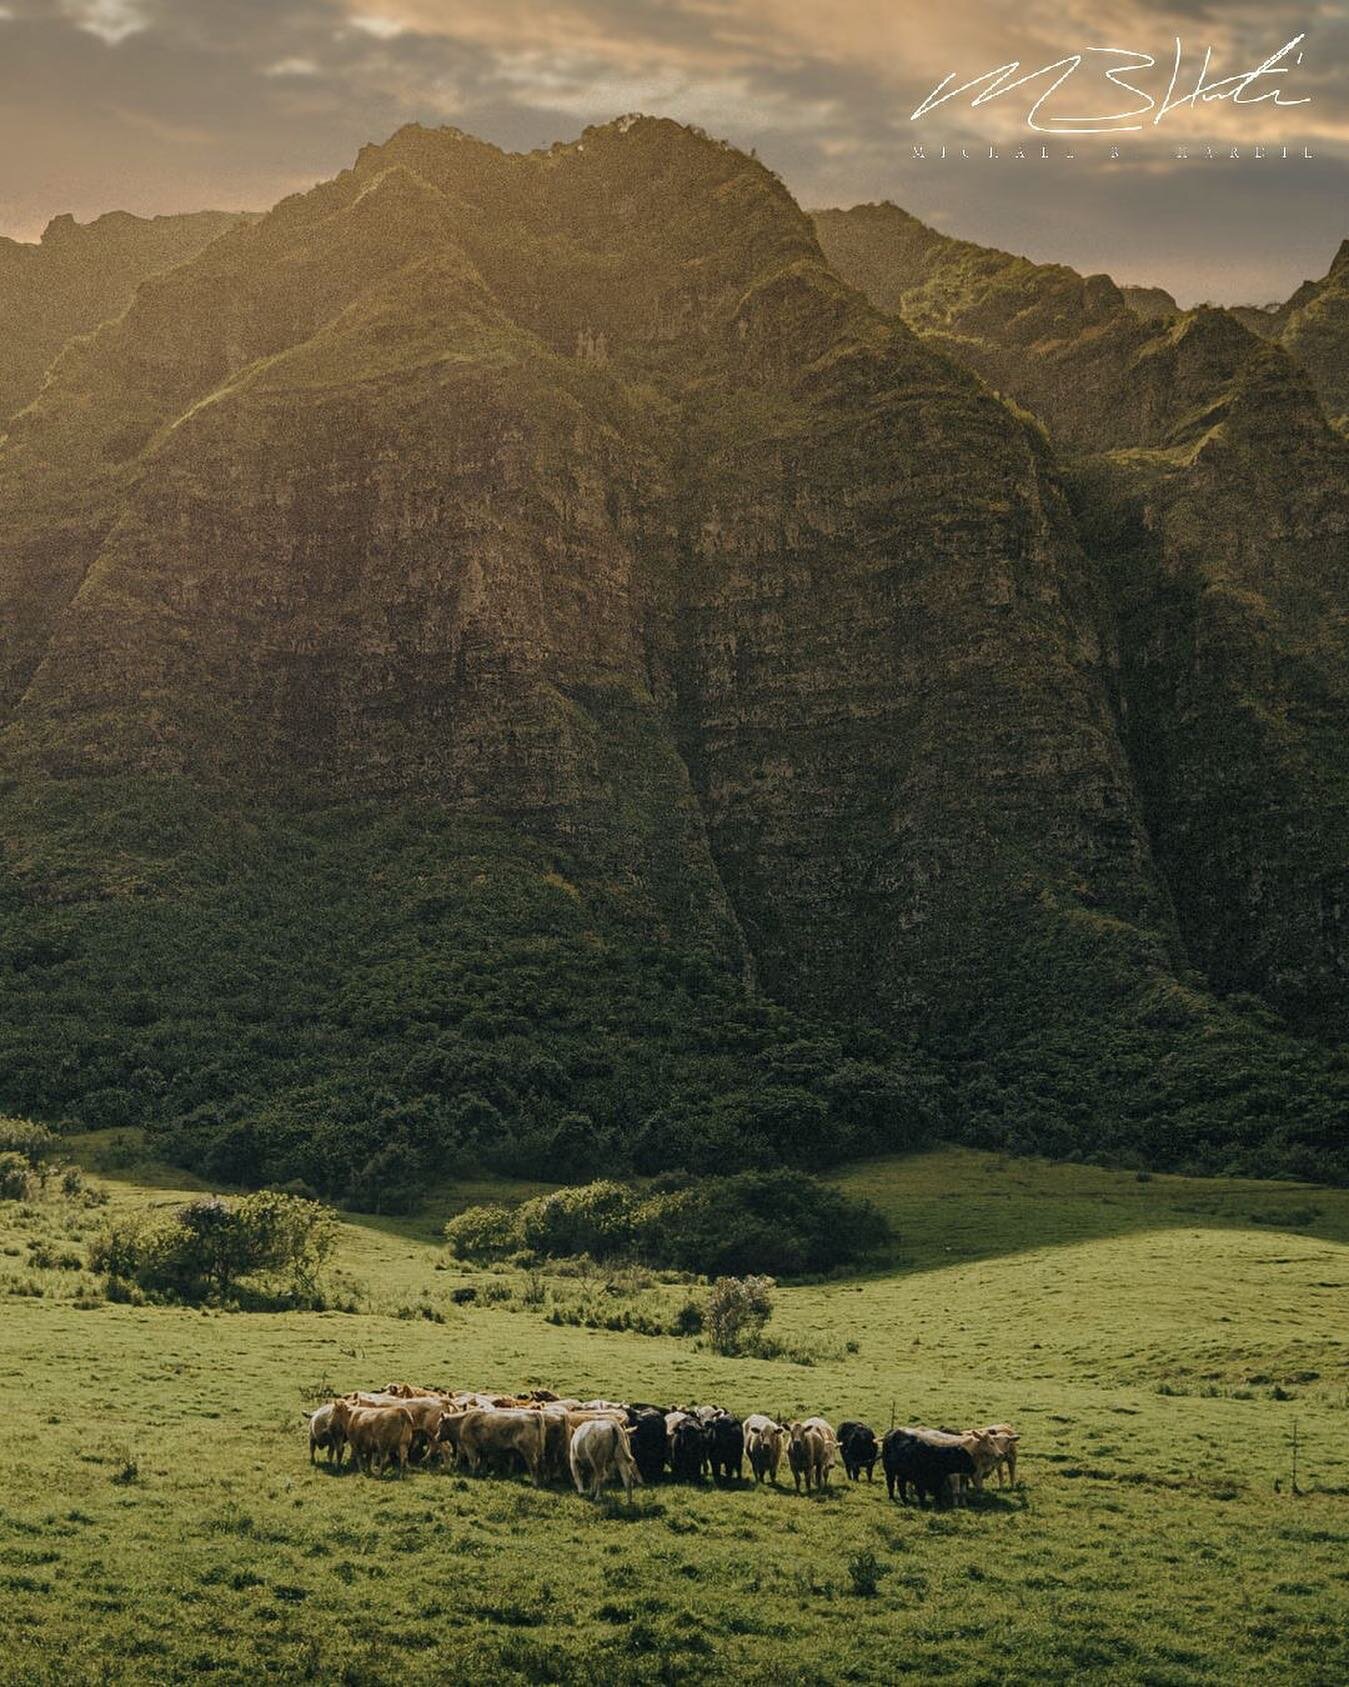 Gathering Place

Bovine gather underneath beautiful ridges at Kualoa Ranch, the filming location of many movies including Jurassic Park.